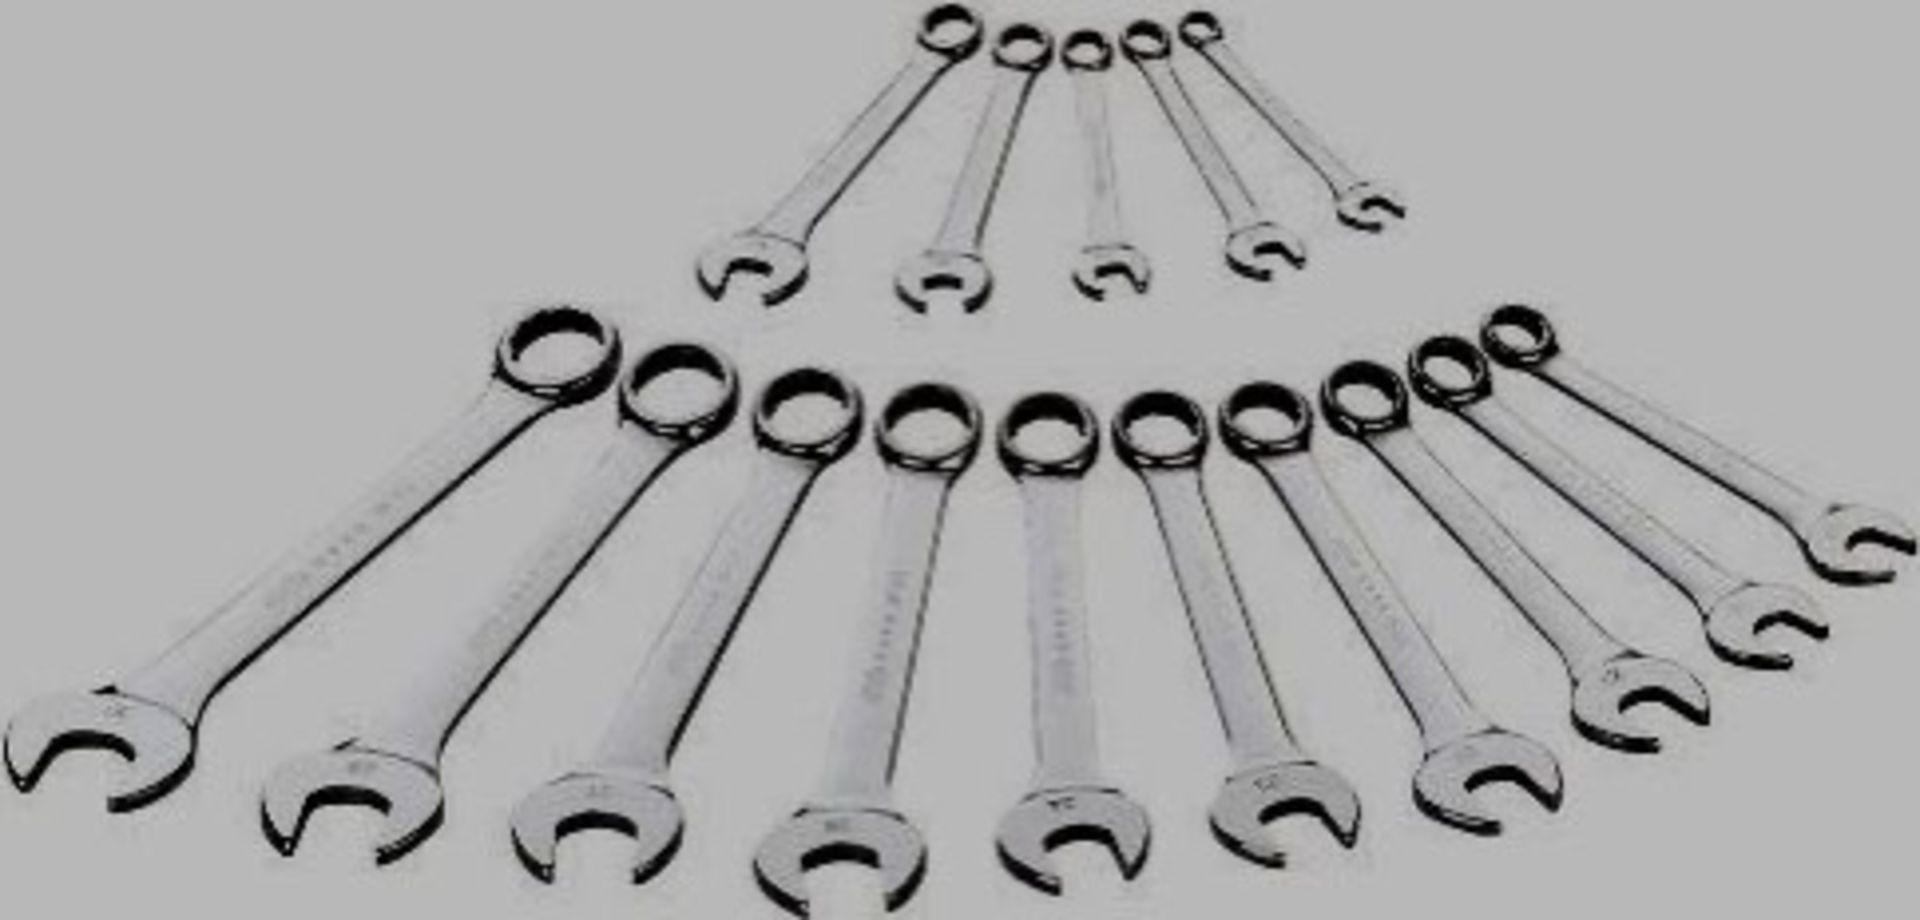 Quality Imperial Spanner Set. SAM Outillage 50-J15A Set of 15 no vat on hammer.You will get 1 set as